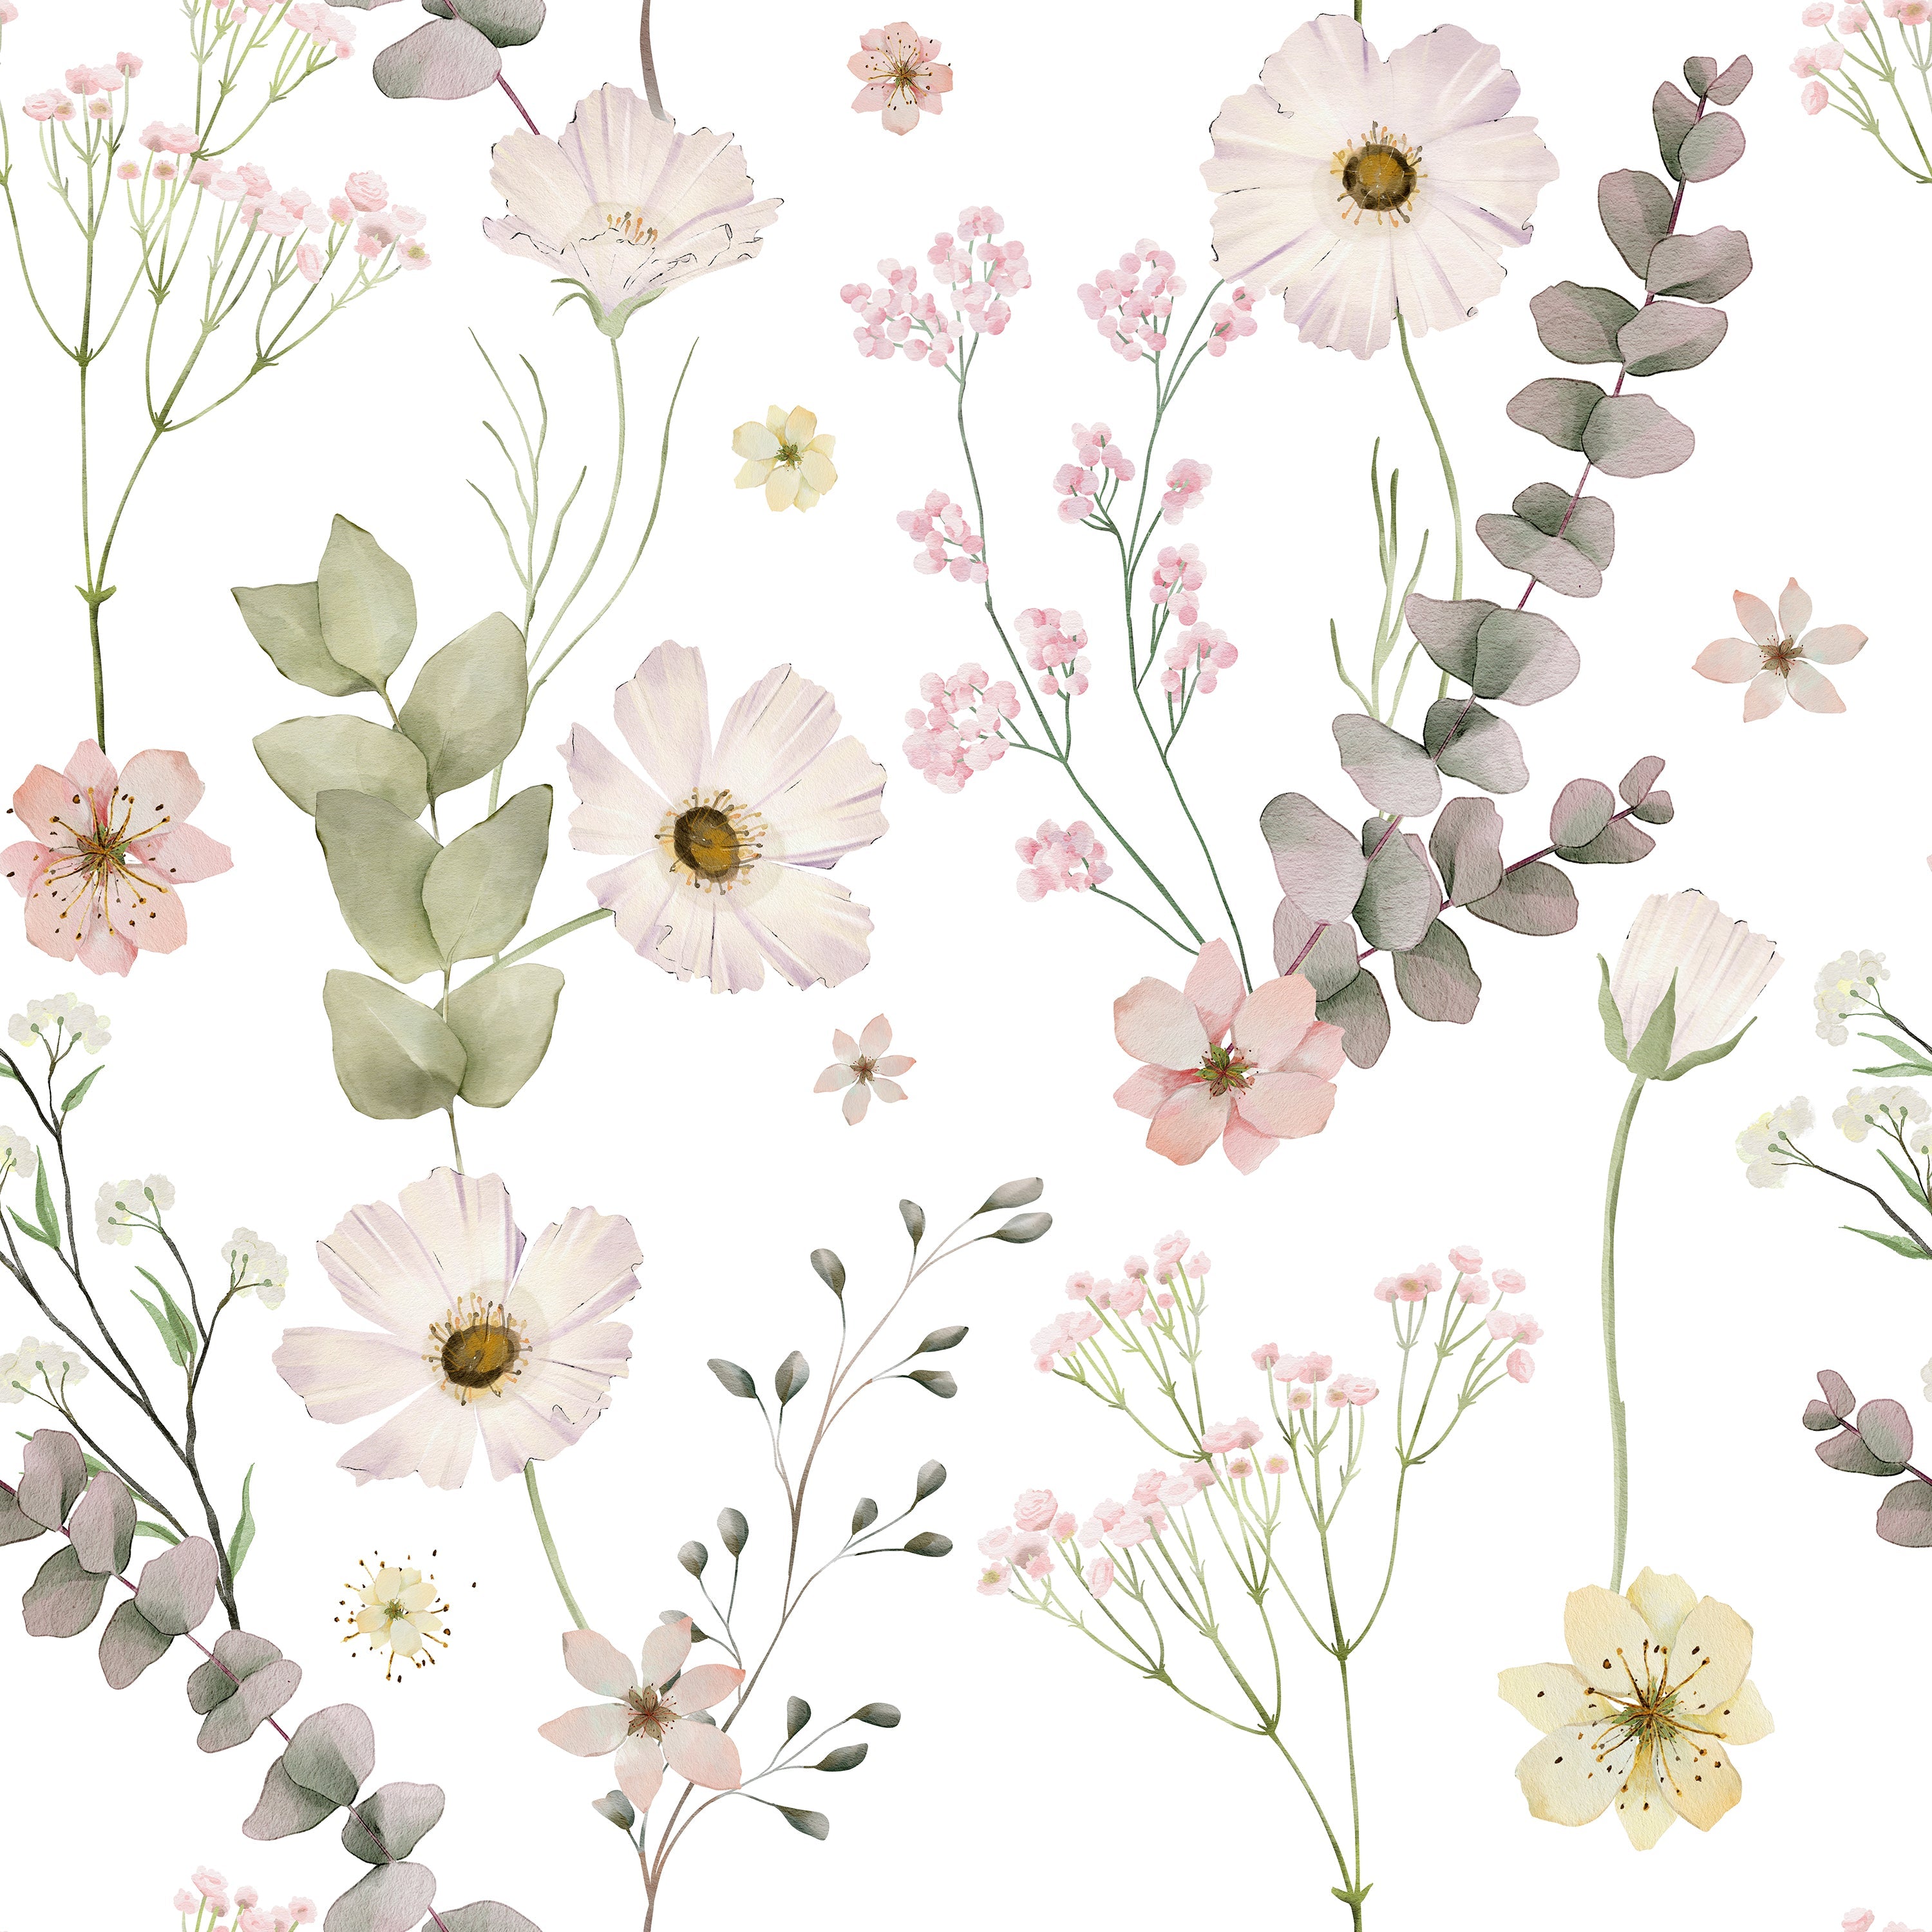 a detailed view of the "Botanical Muse Wallpaper - 75"," showcasing an array of watercolor floral illustrations. Delicate petals in hues of pink, white, and touches of yellow are interwoven with soft green leaves, creating an airy, romantic botanical scene.